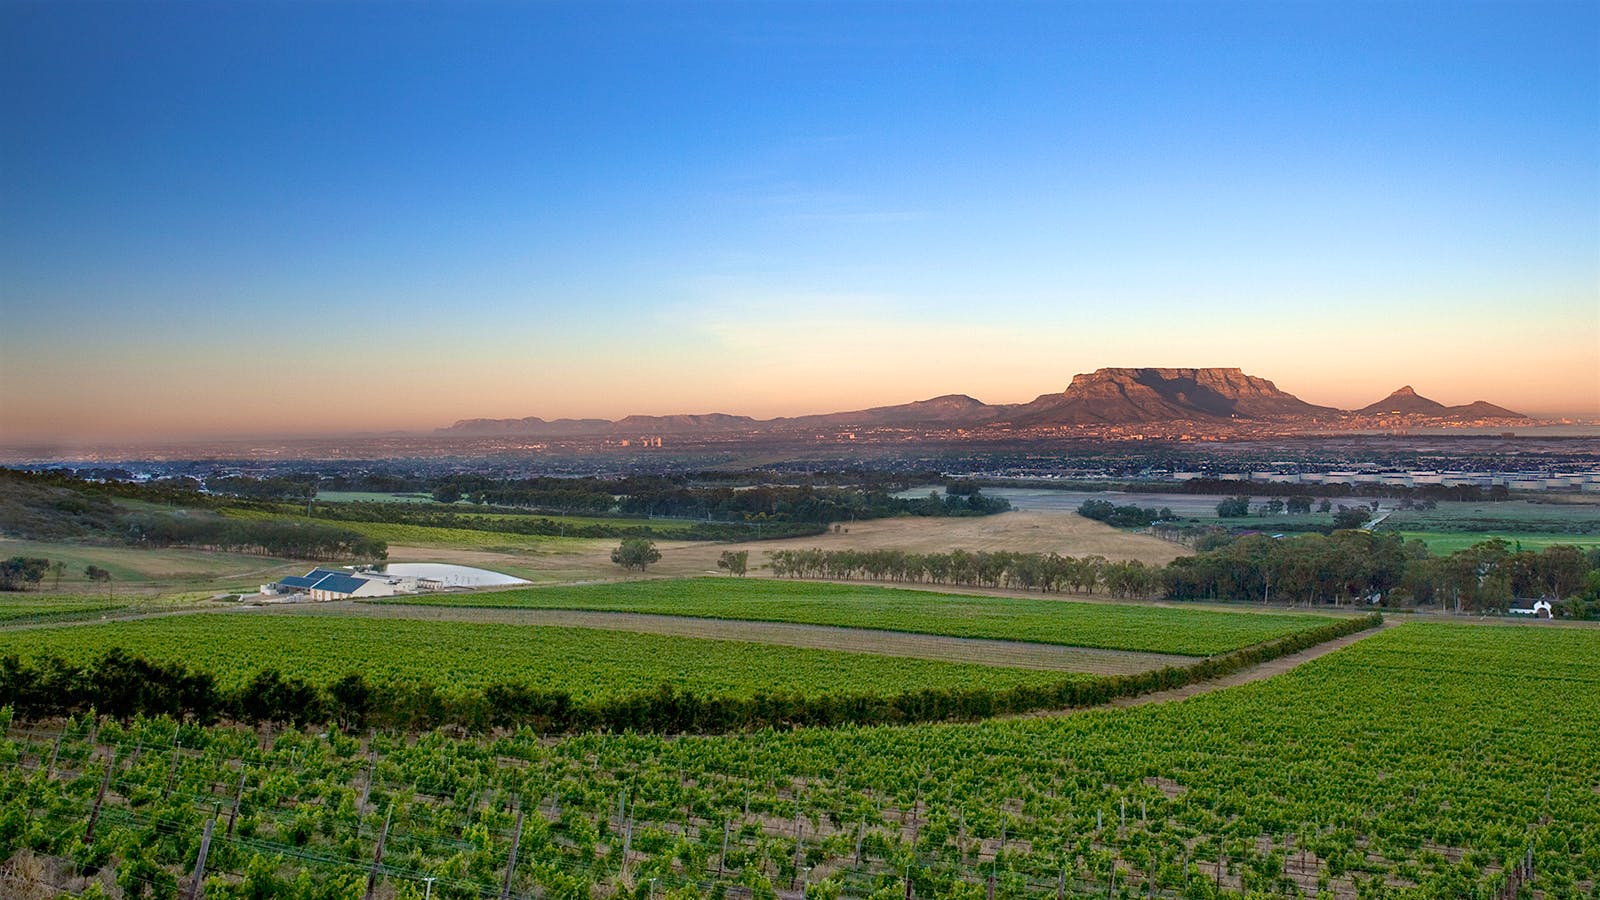 South Africa Gains New Appellation with a Familiar Name: Cape Town